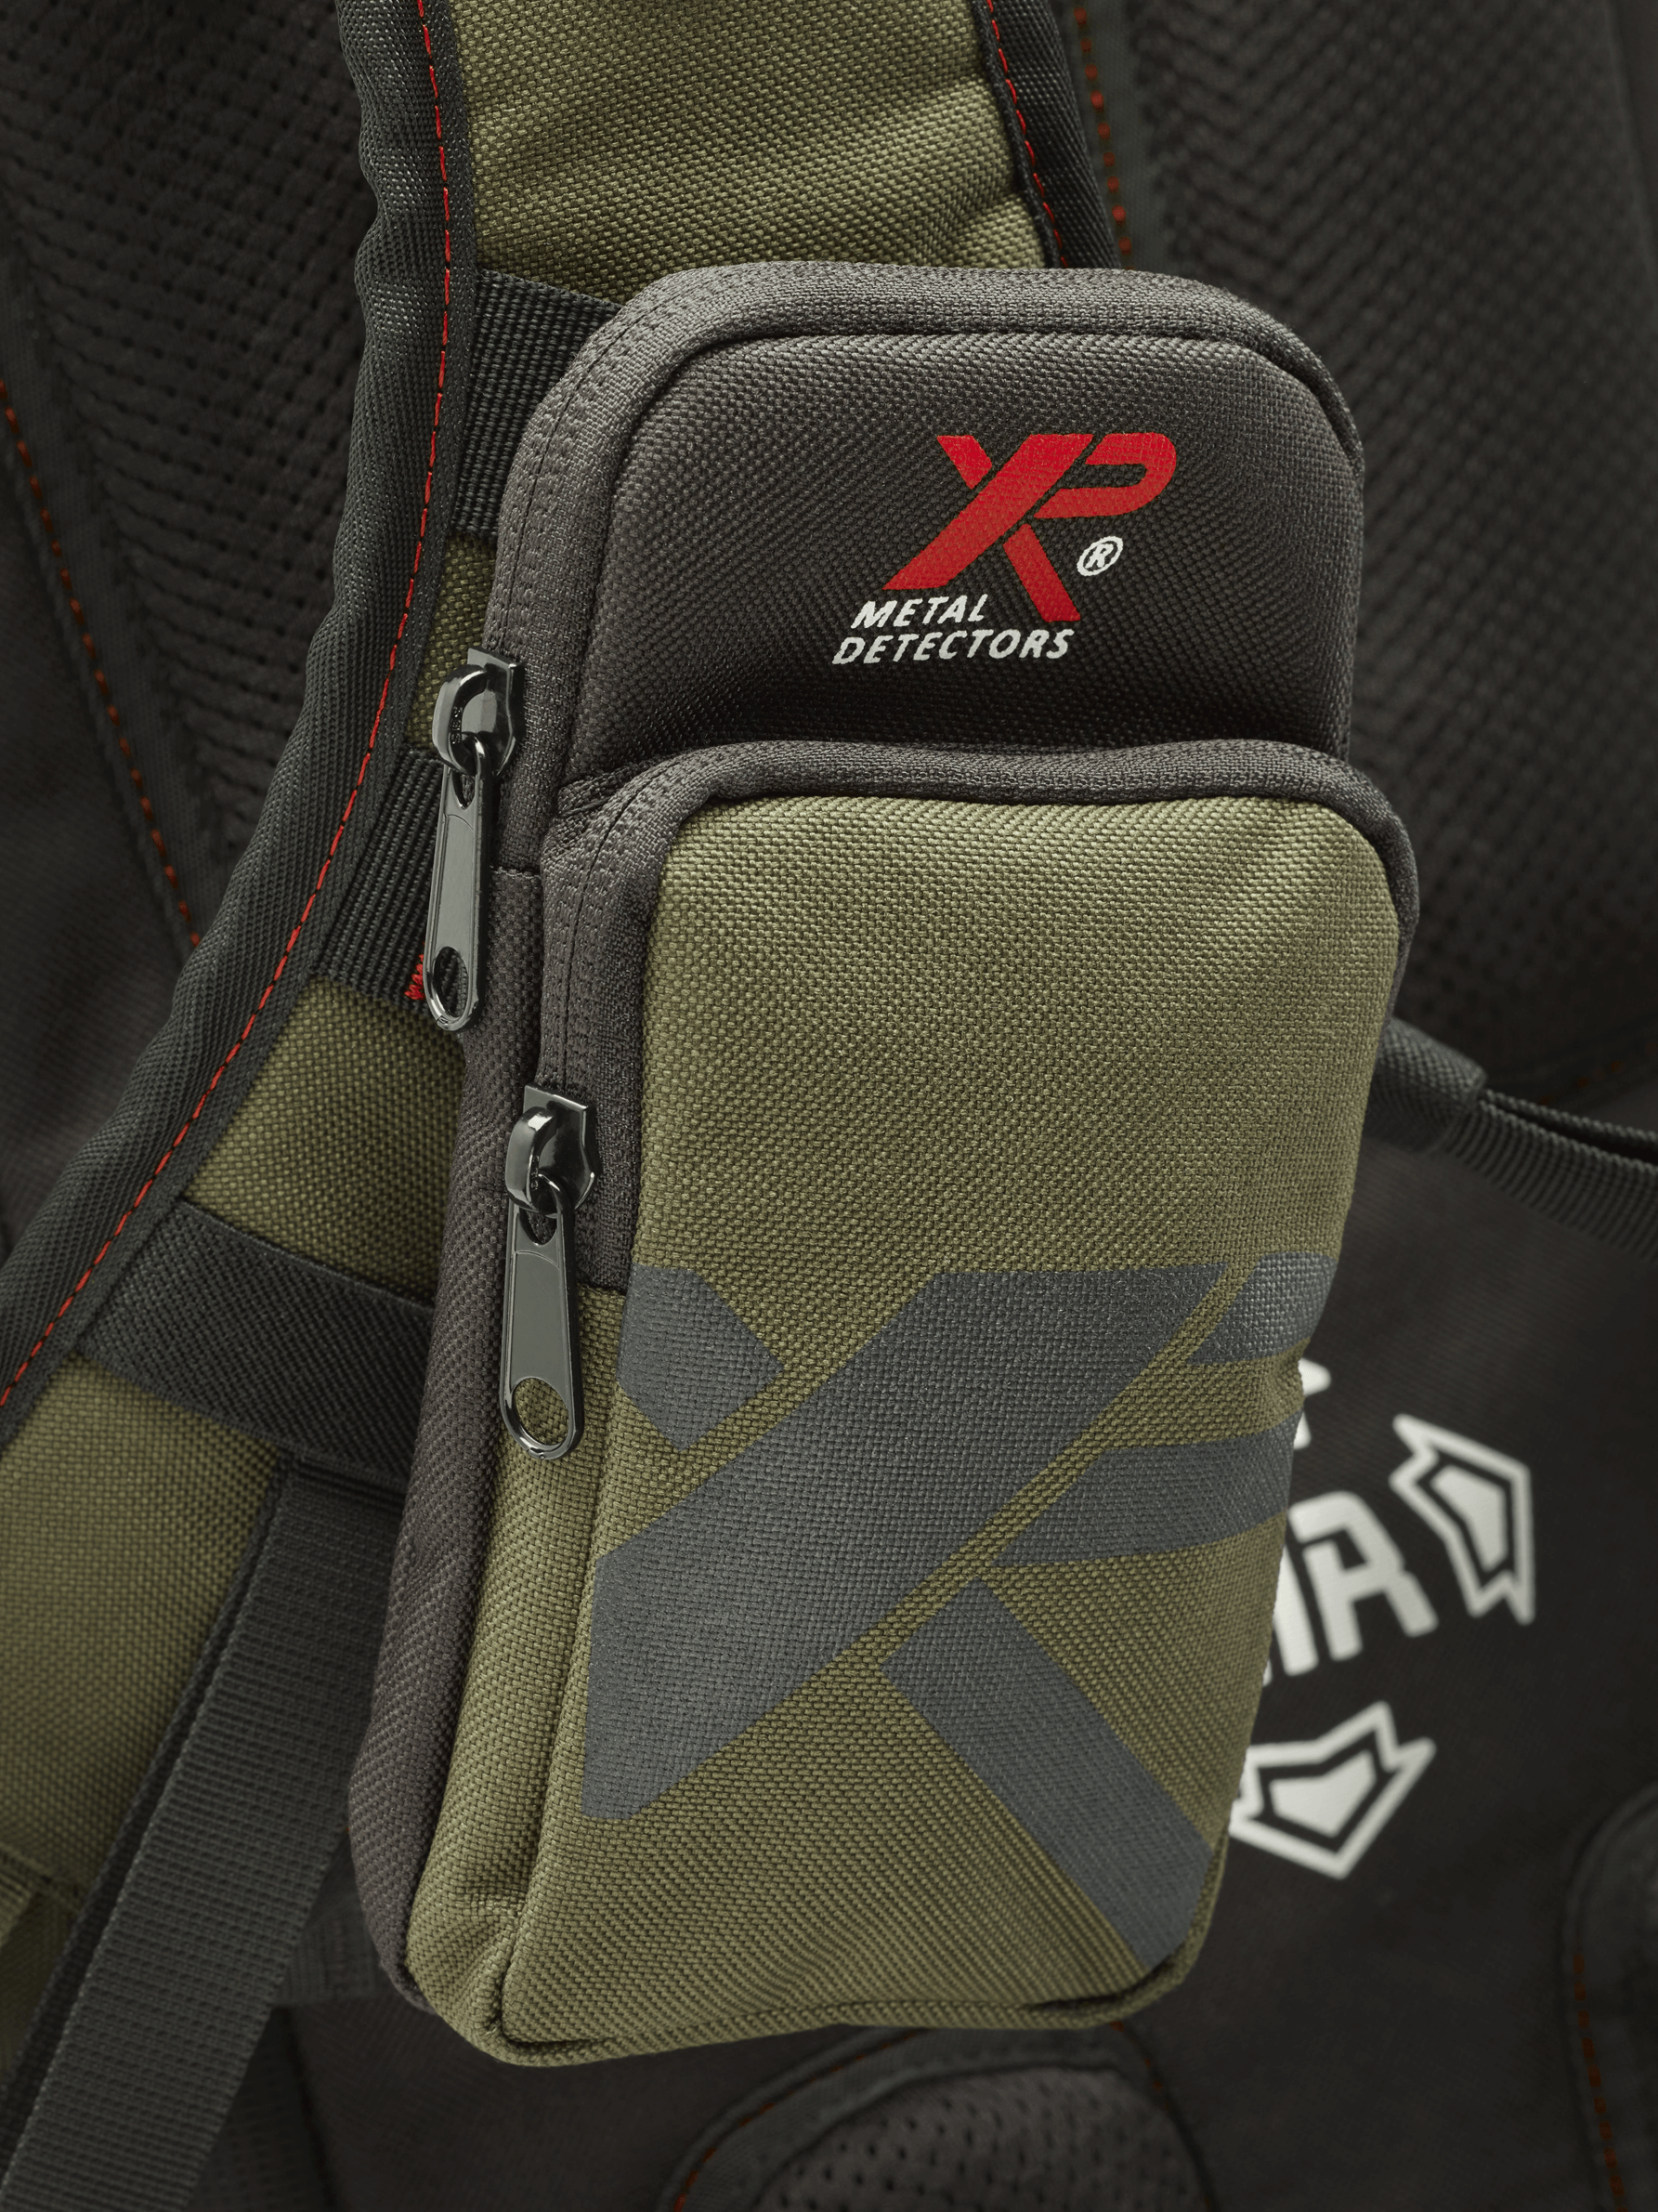 travel xp backpack